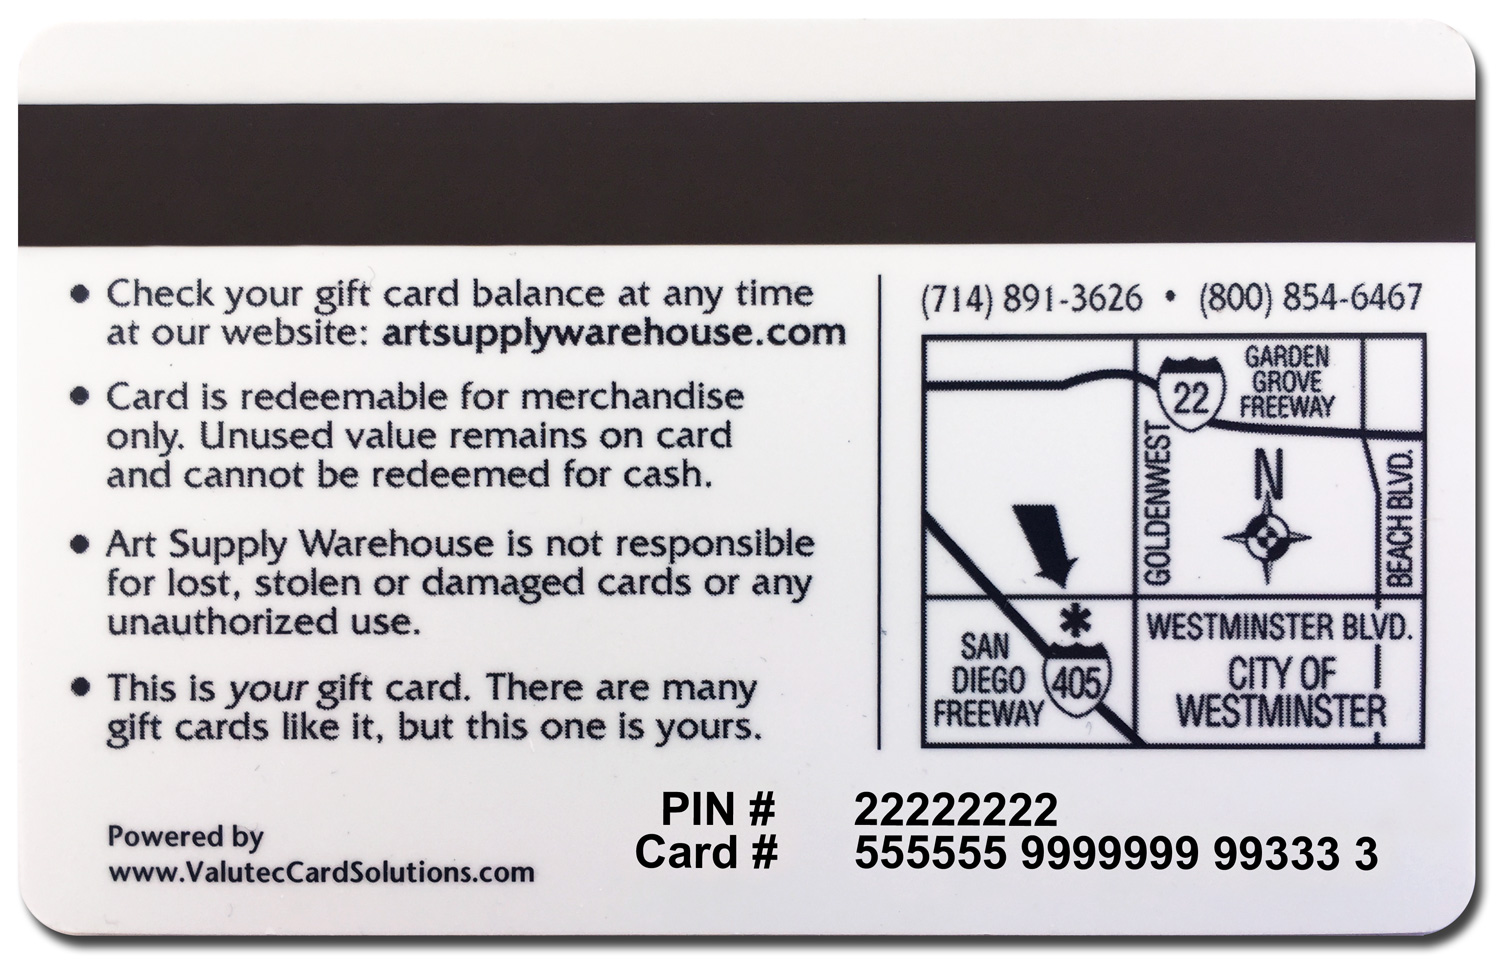 The back of an Old Style card has a PIN # with an eight digit number in the style 22222222. Under that, it has a Card # with a nineteen digit number in the style 555555 9999999 99333 3.